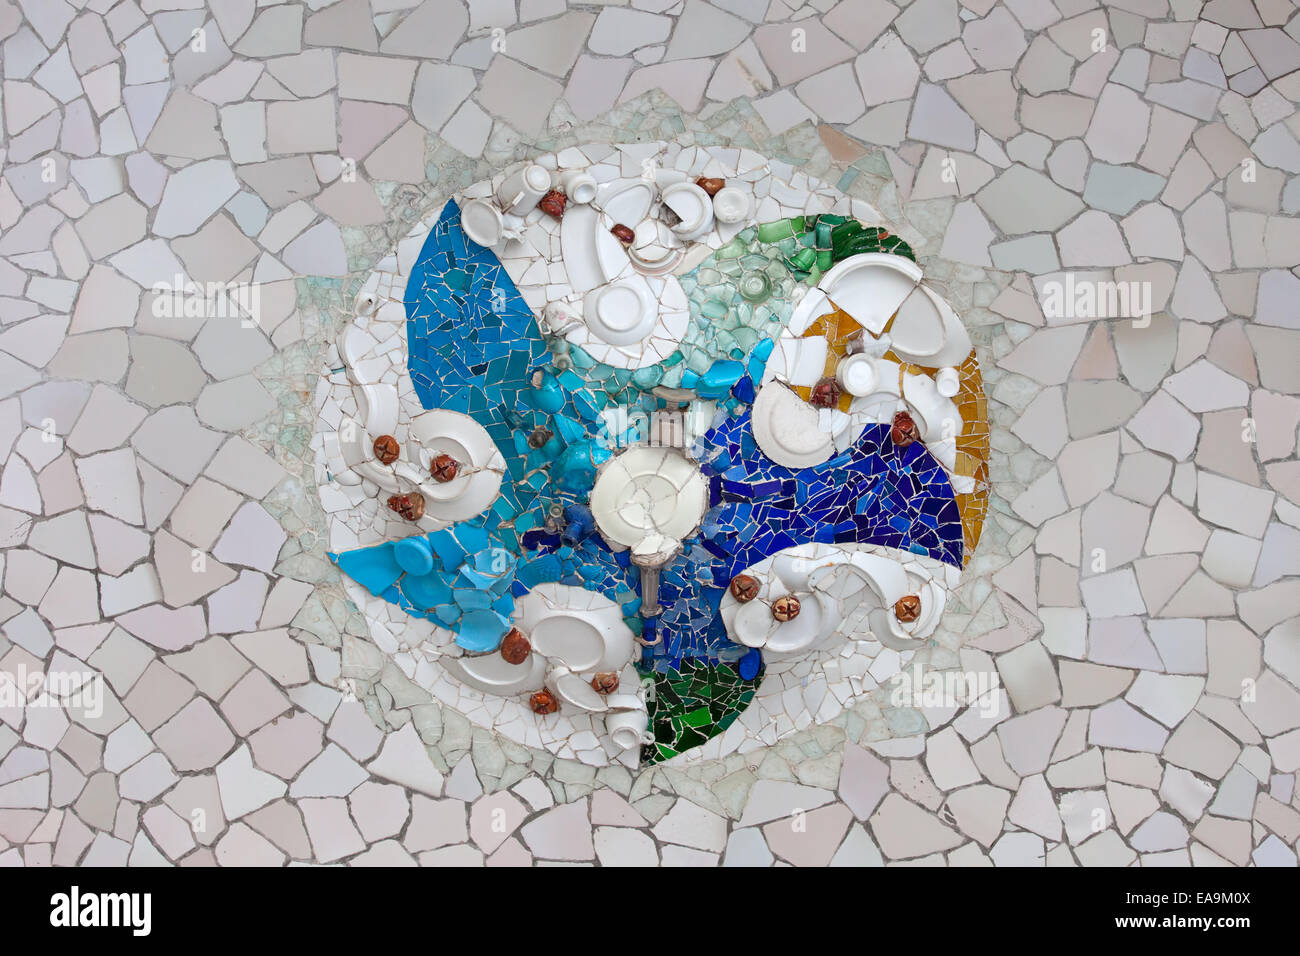 Trencadis mosaic from broken tile shards on the ceiling of Hypostyle Room in Park Guell, Barcelona, Catalonia, Spain. Stock Photo